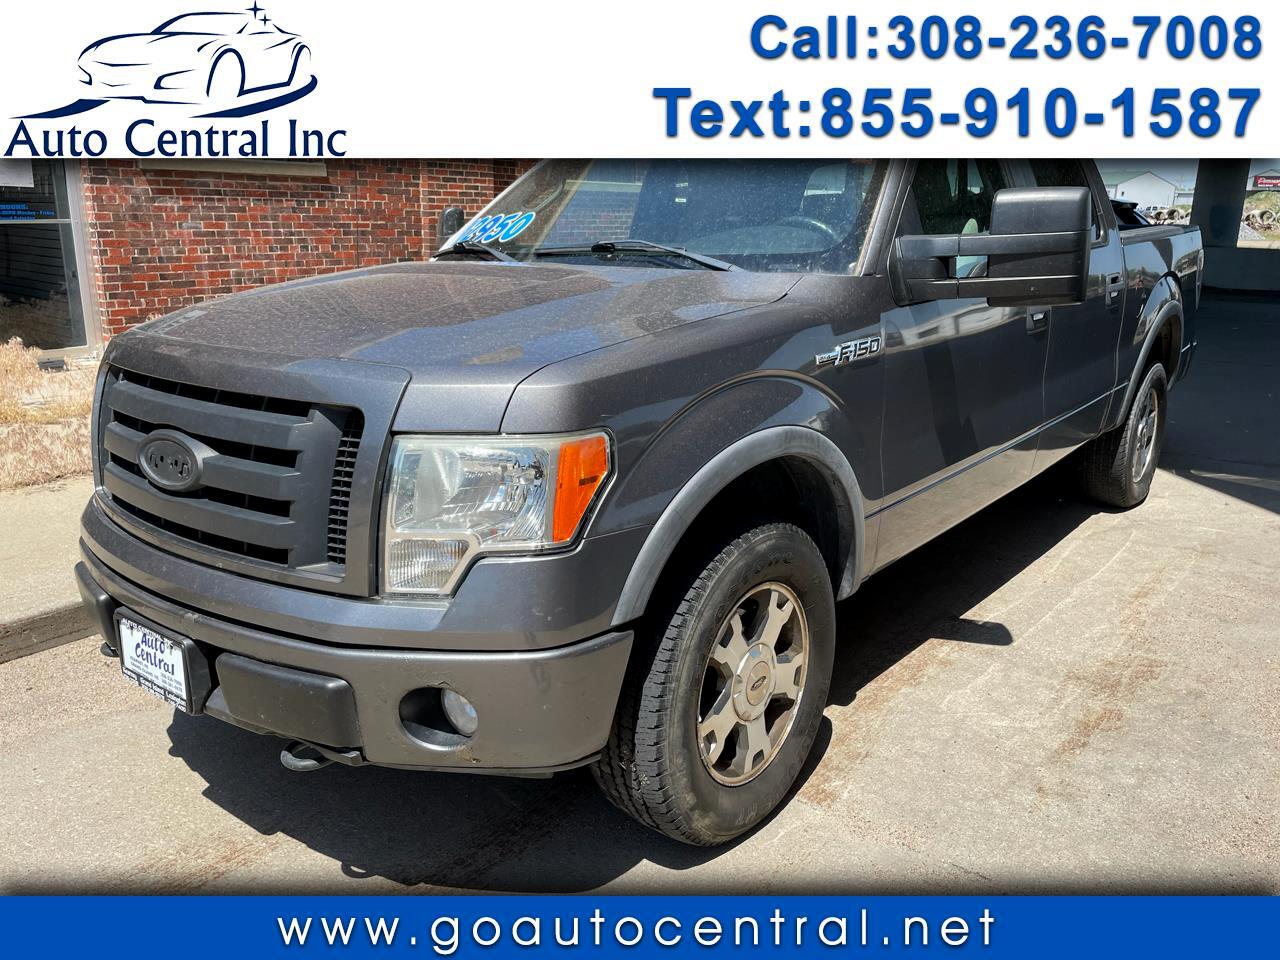 2009 Ford F-150 4WD SuperCrew 145" FX4